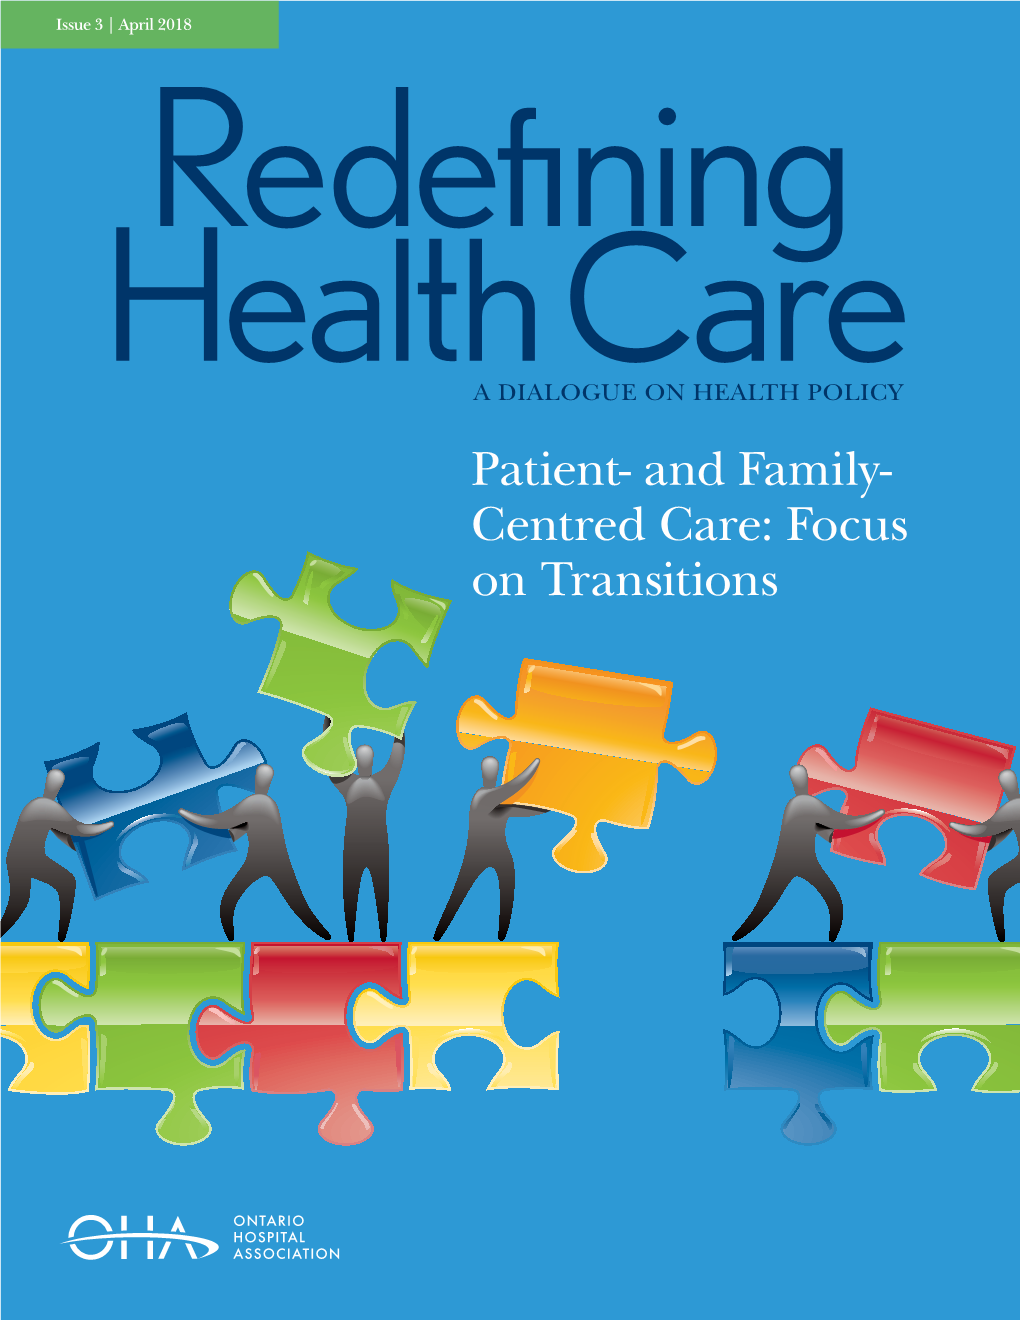 Patient- and Family- Centred Care: Focus on Transitions